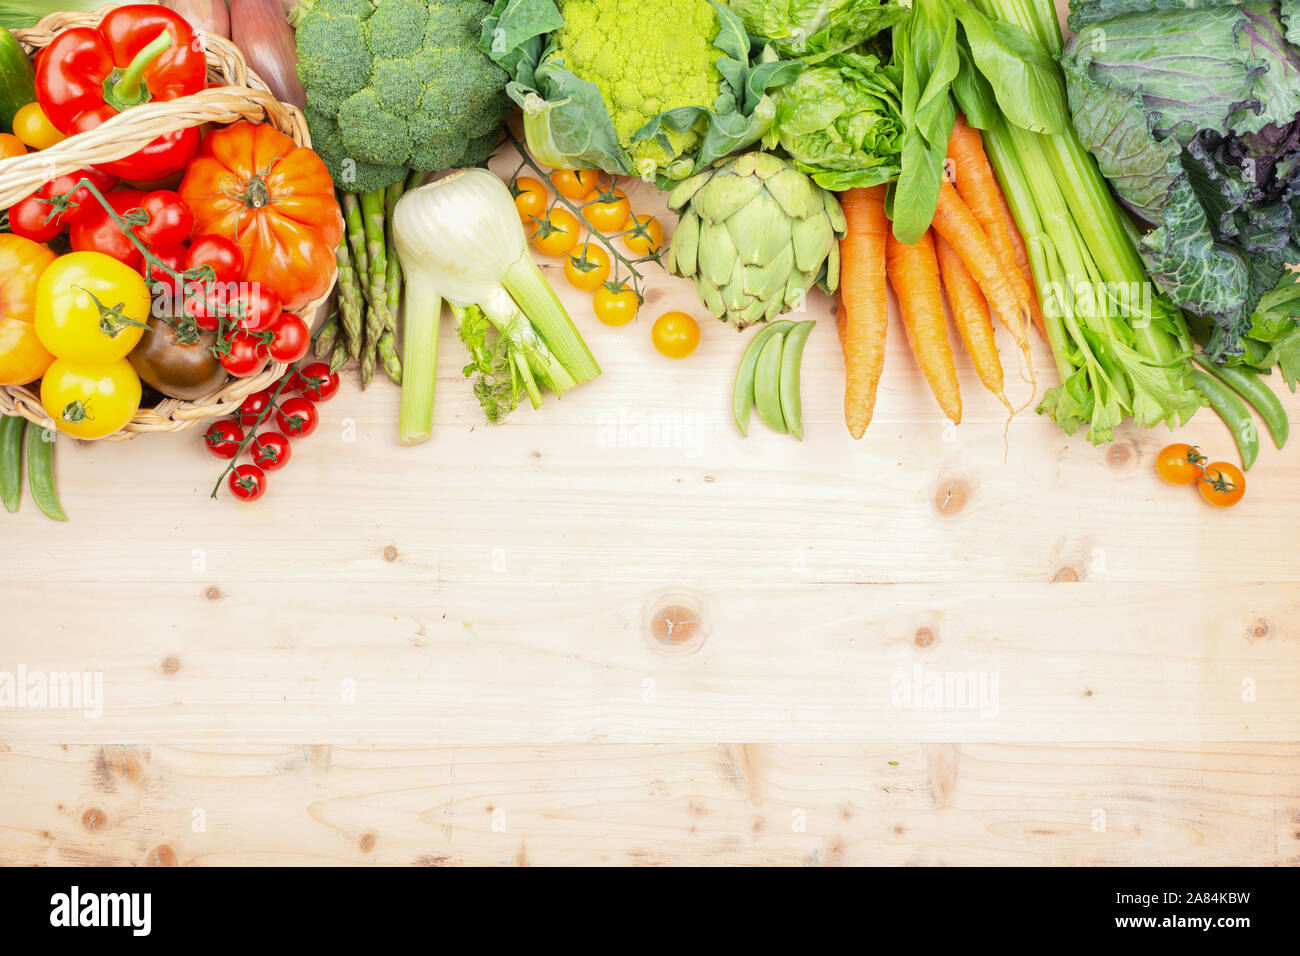 Top view of vegetables on wooden table and wicker basket, carrots velery tomatoes cabbage broccoli, copy space, selective focus Stock Photo